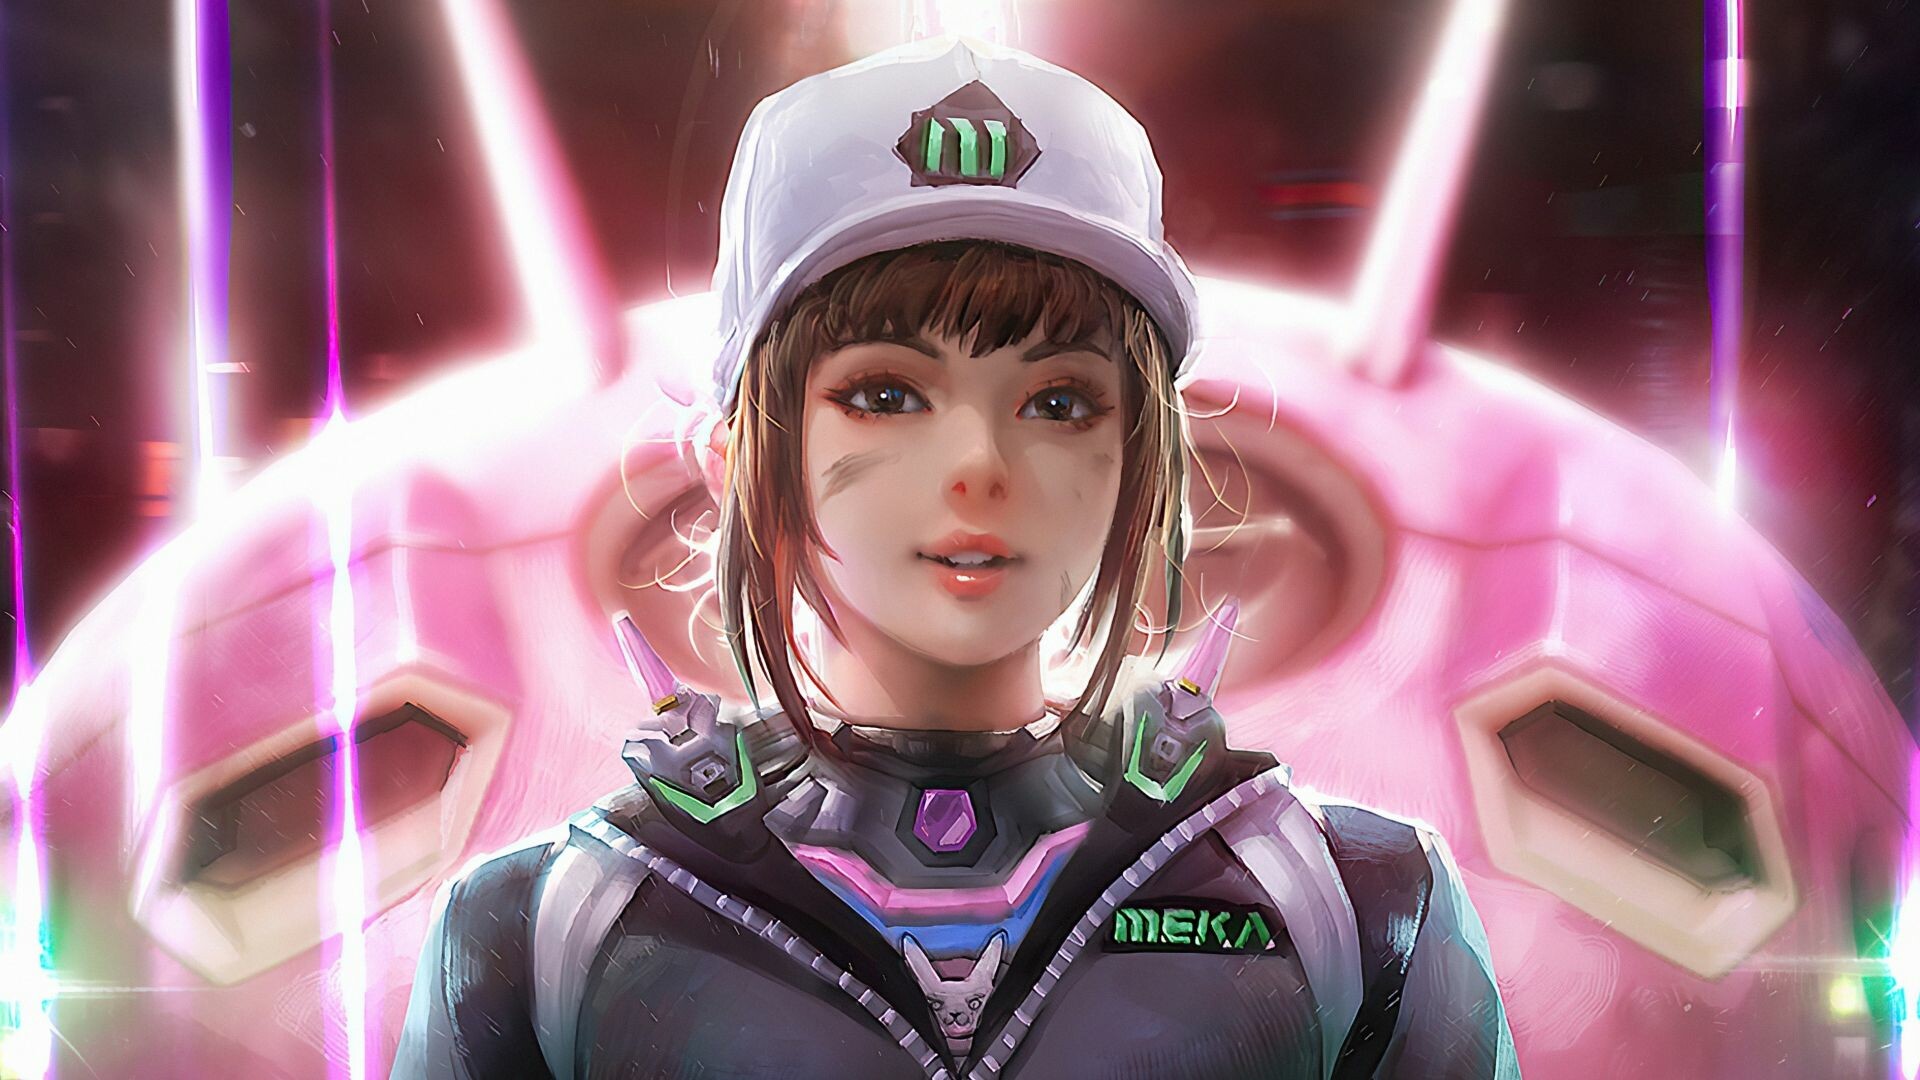 Overwatch: D.Va, Pilots a combat mecha armed with twin Fusion Cannons. 1920x1080 Full HD Background.